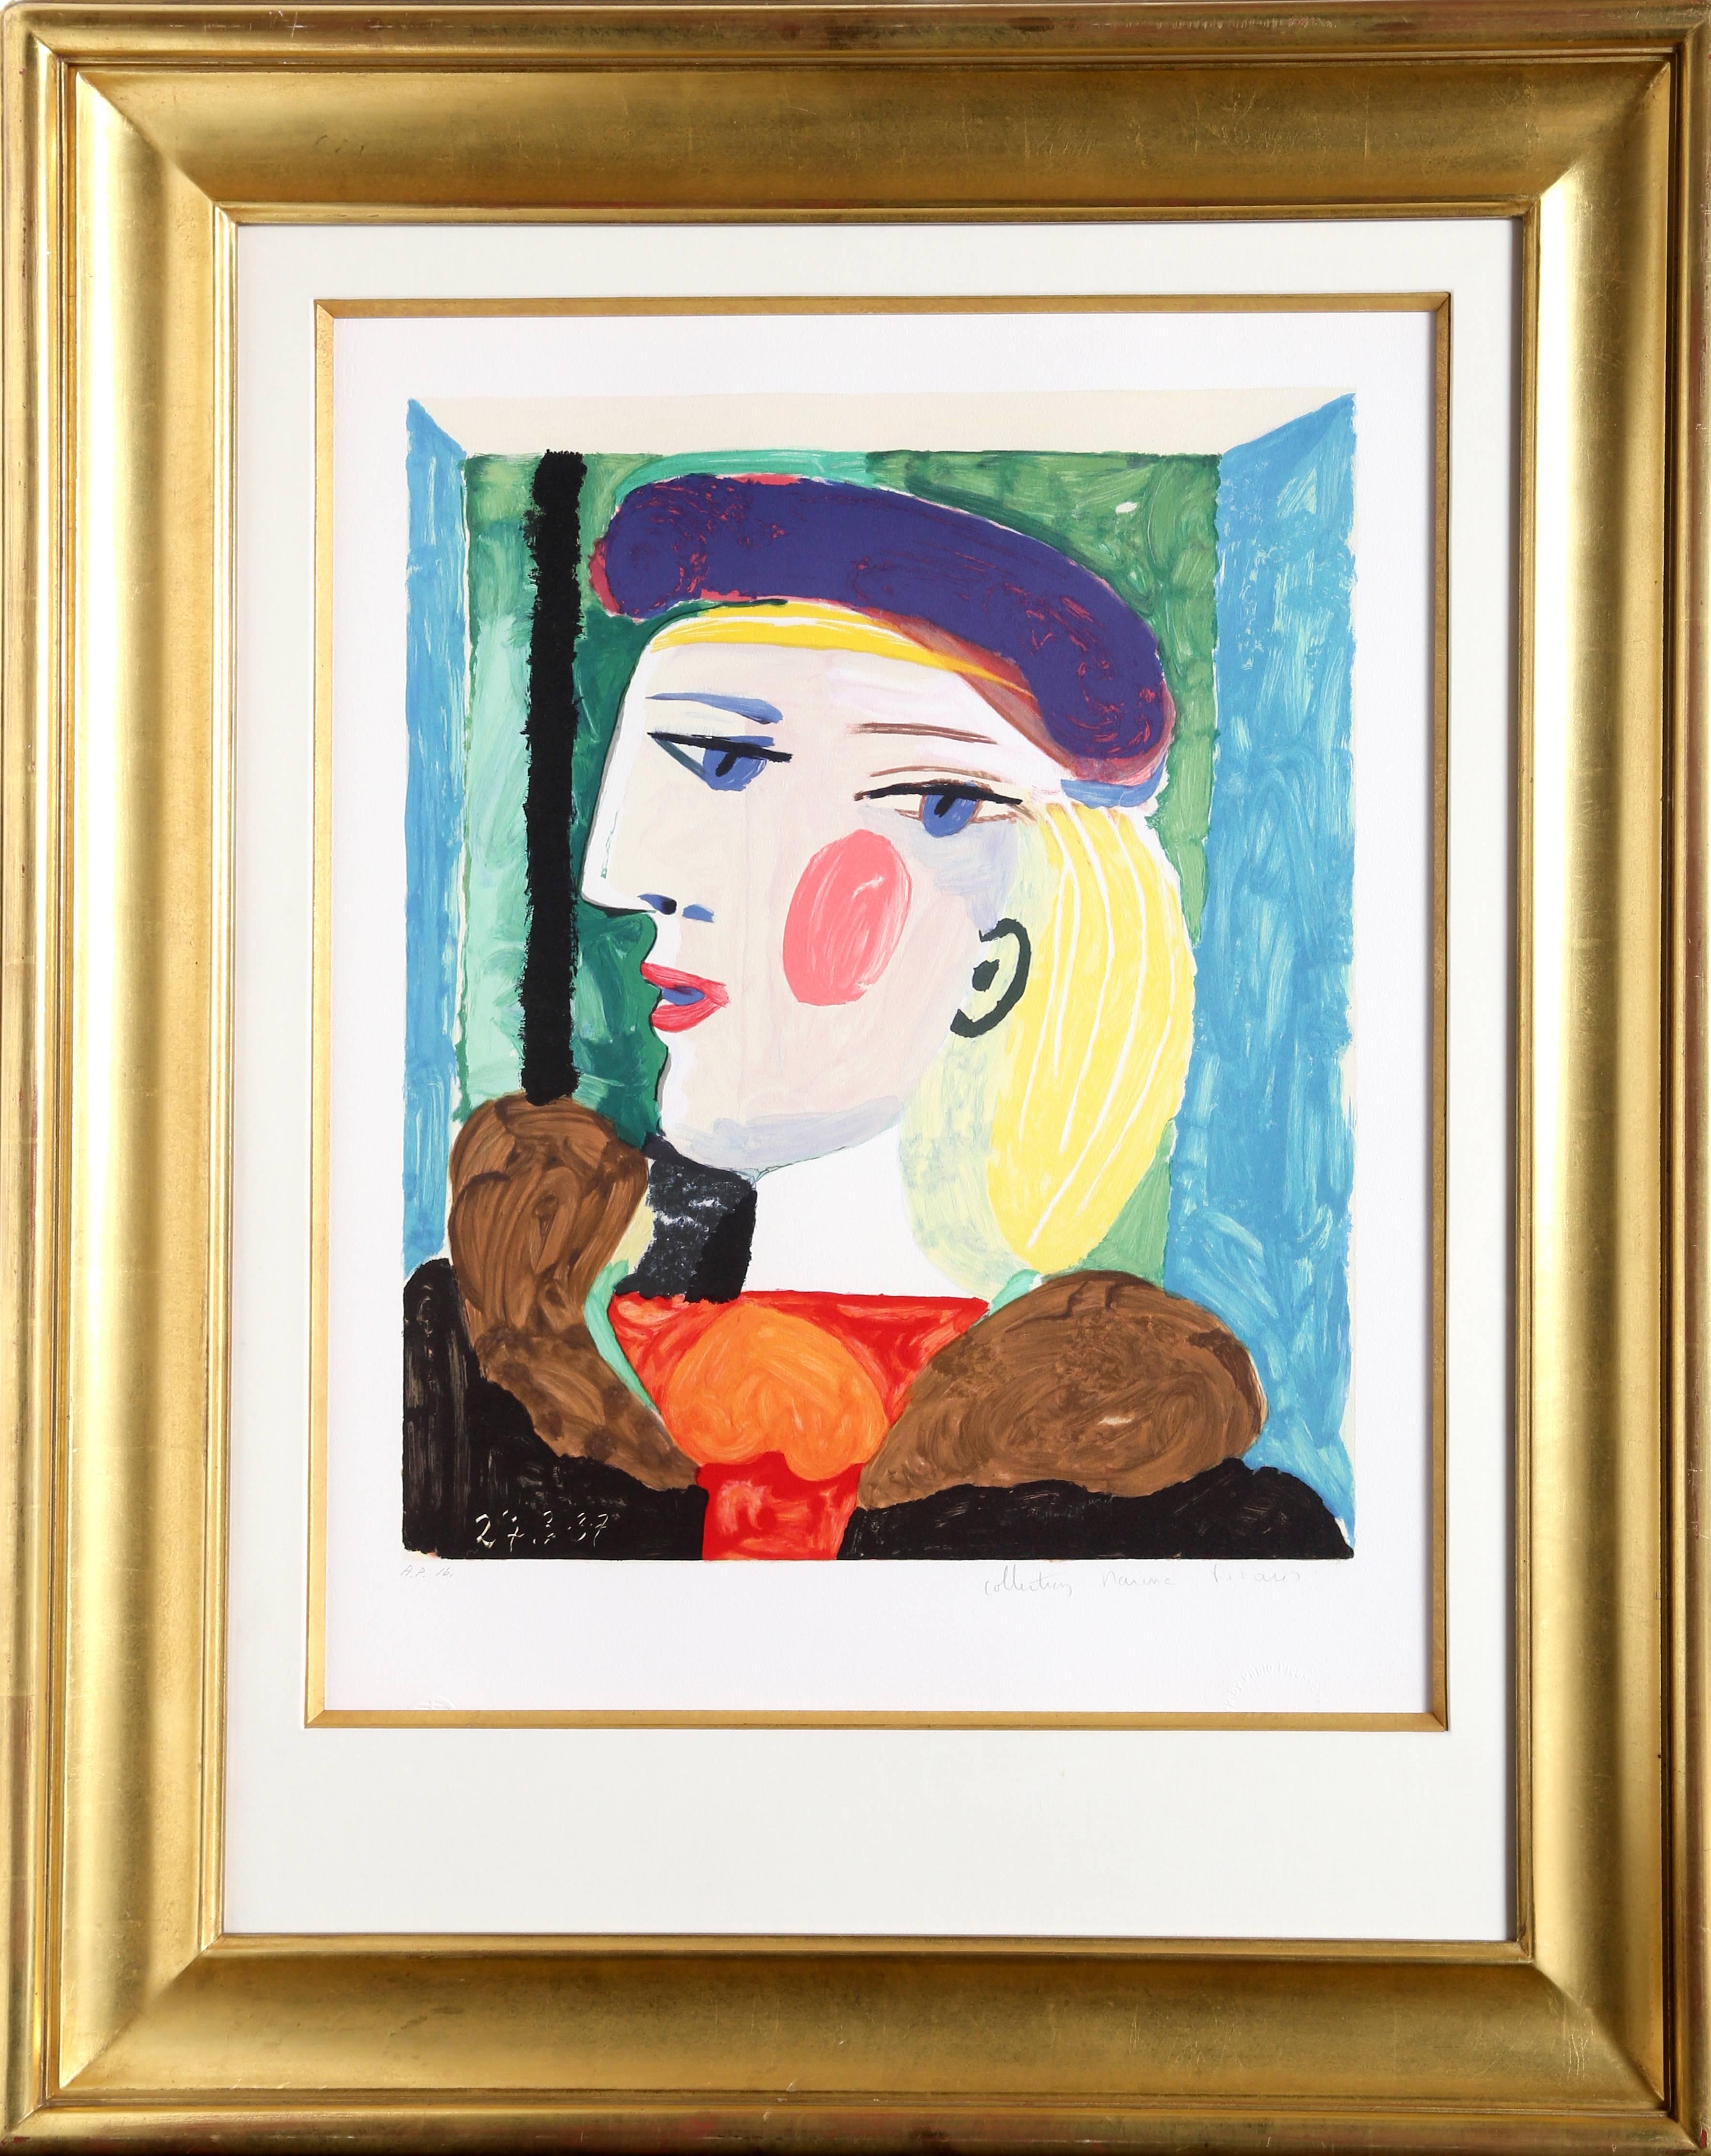 Pablo Picasso Portrait Print - Femme Profile (Marie-Therese Walter), Lithograph from the Marina Picasso Estate